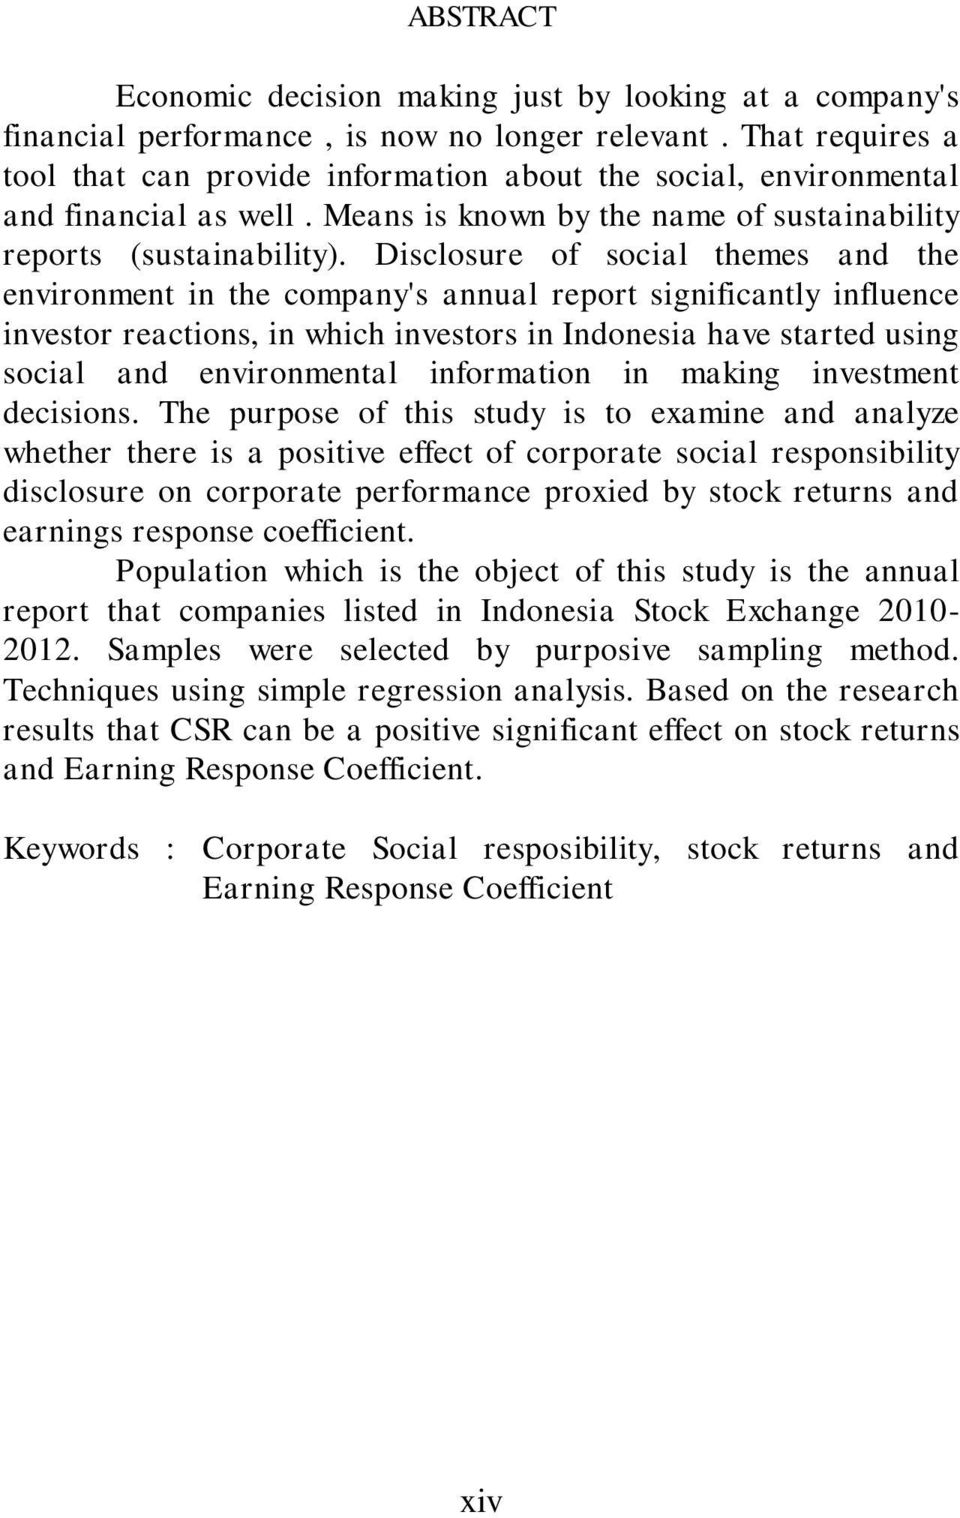 Disclosure of social themes and the environment in the company's annual report significantly influence investor reactions, in which investors in Indonesia have started using social and environmental